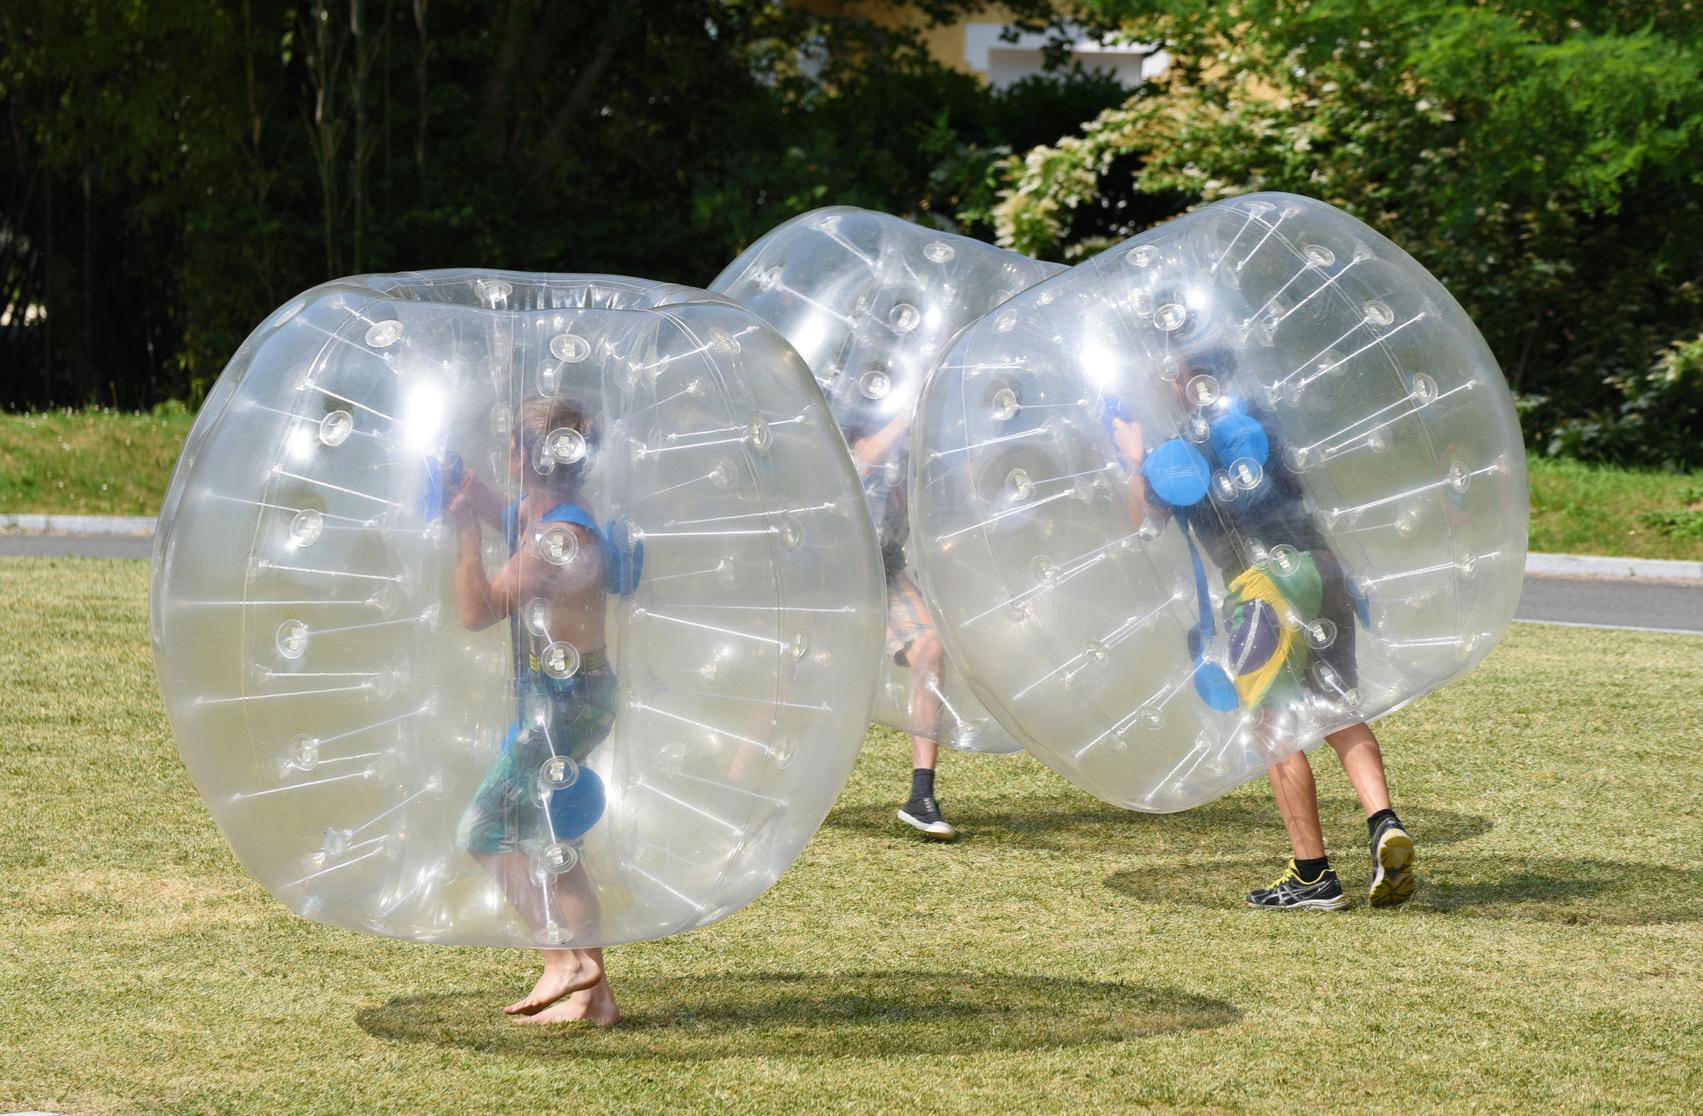 Several people are playing inside of the large transparent plastic spheres (orbs or zorbs) outdoors.